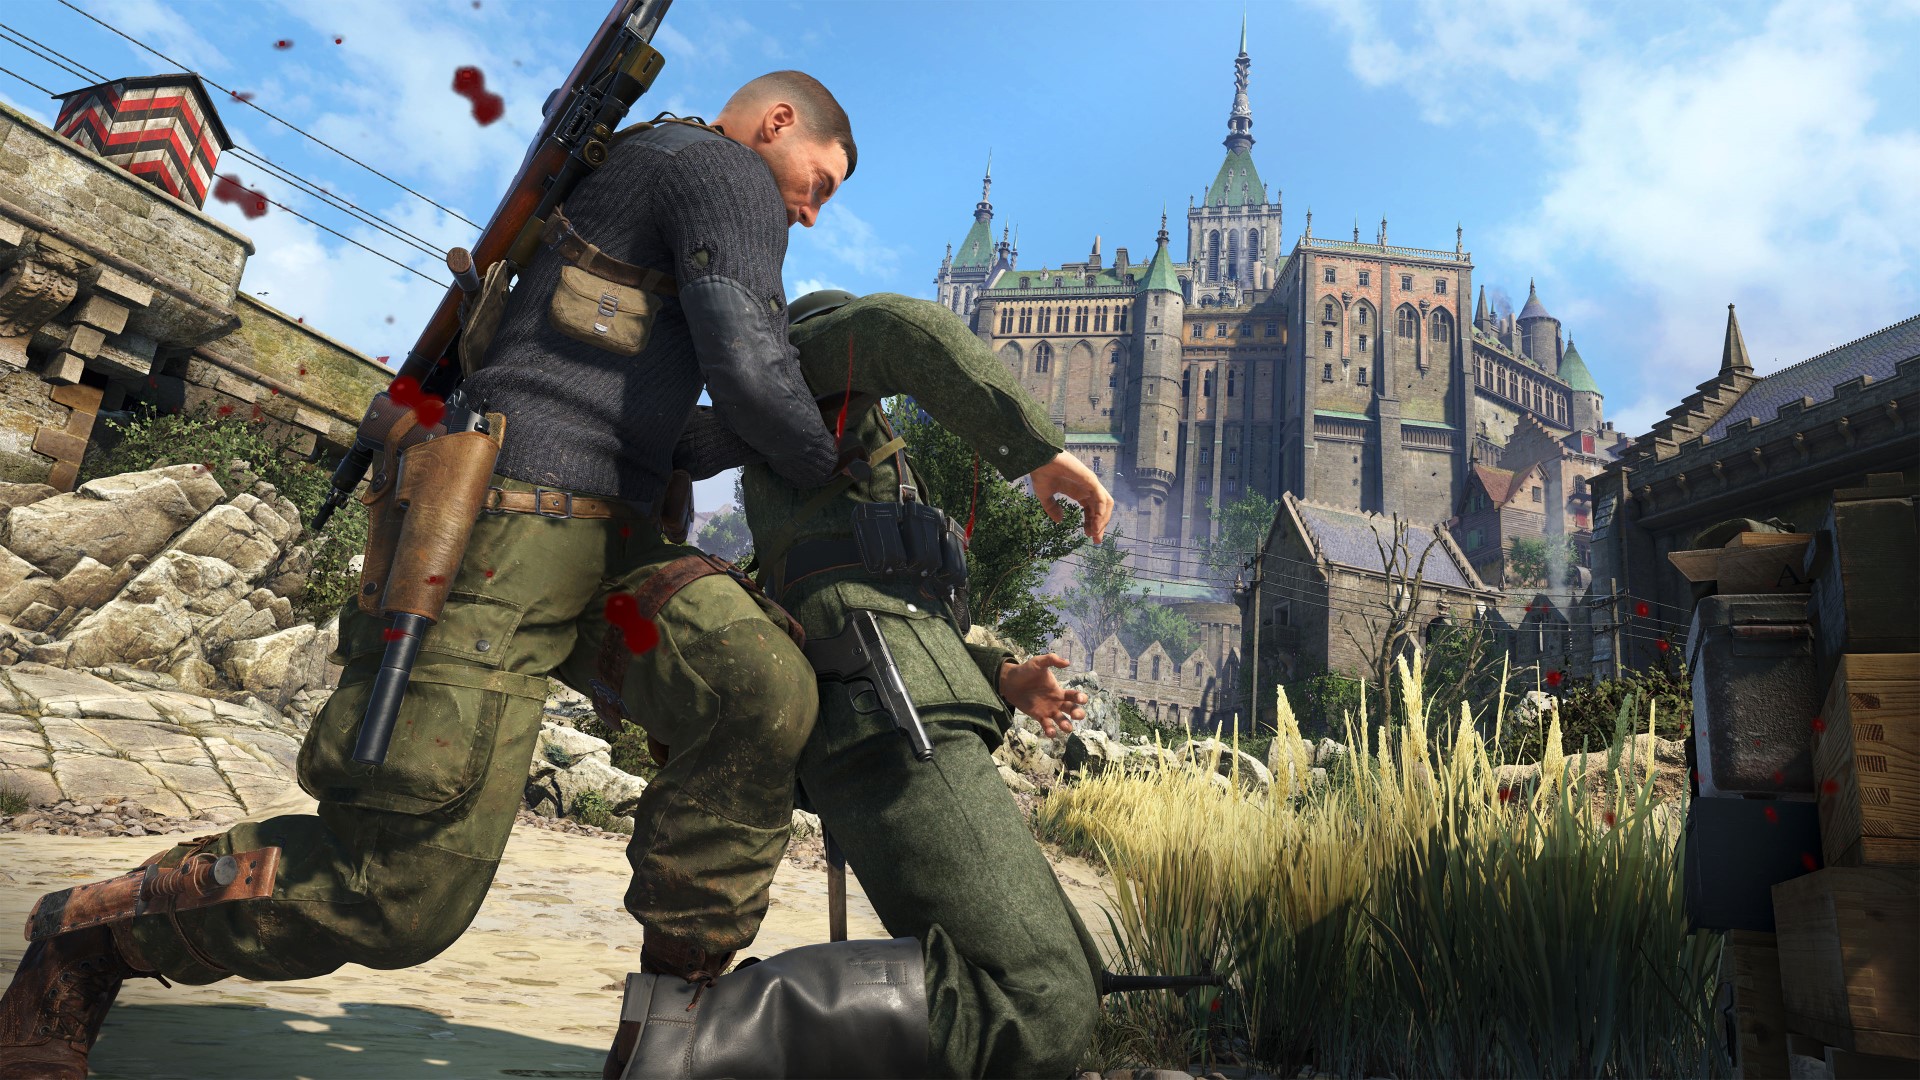 Sniper Elite 5 is set in France and launching next year